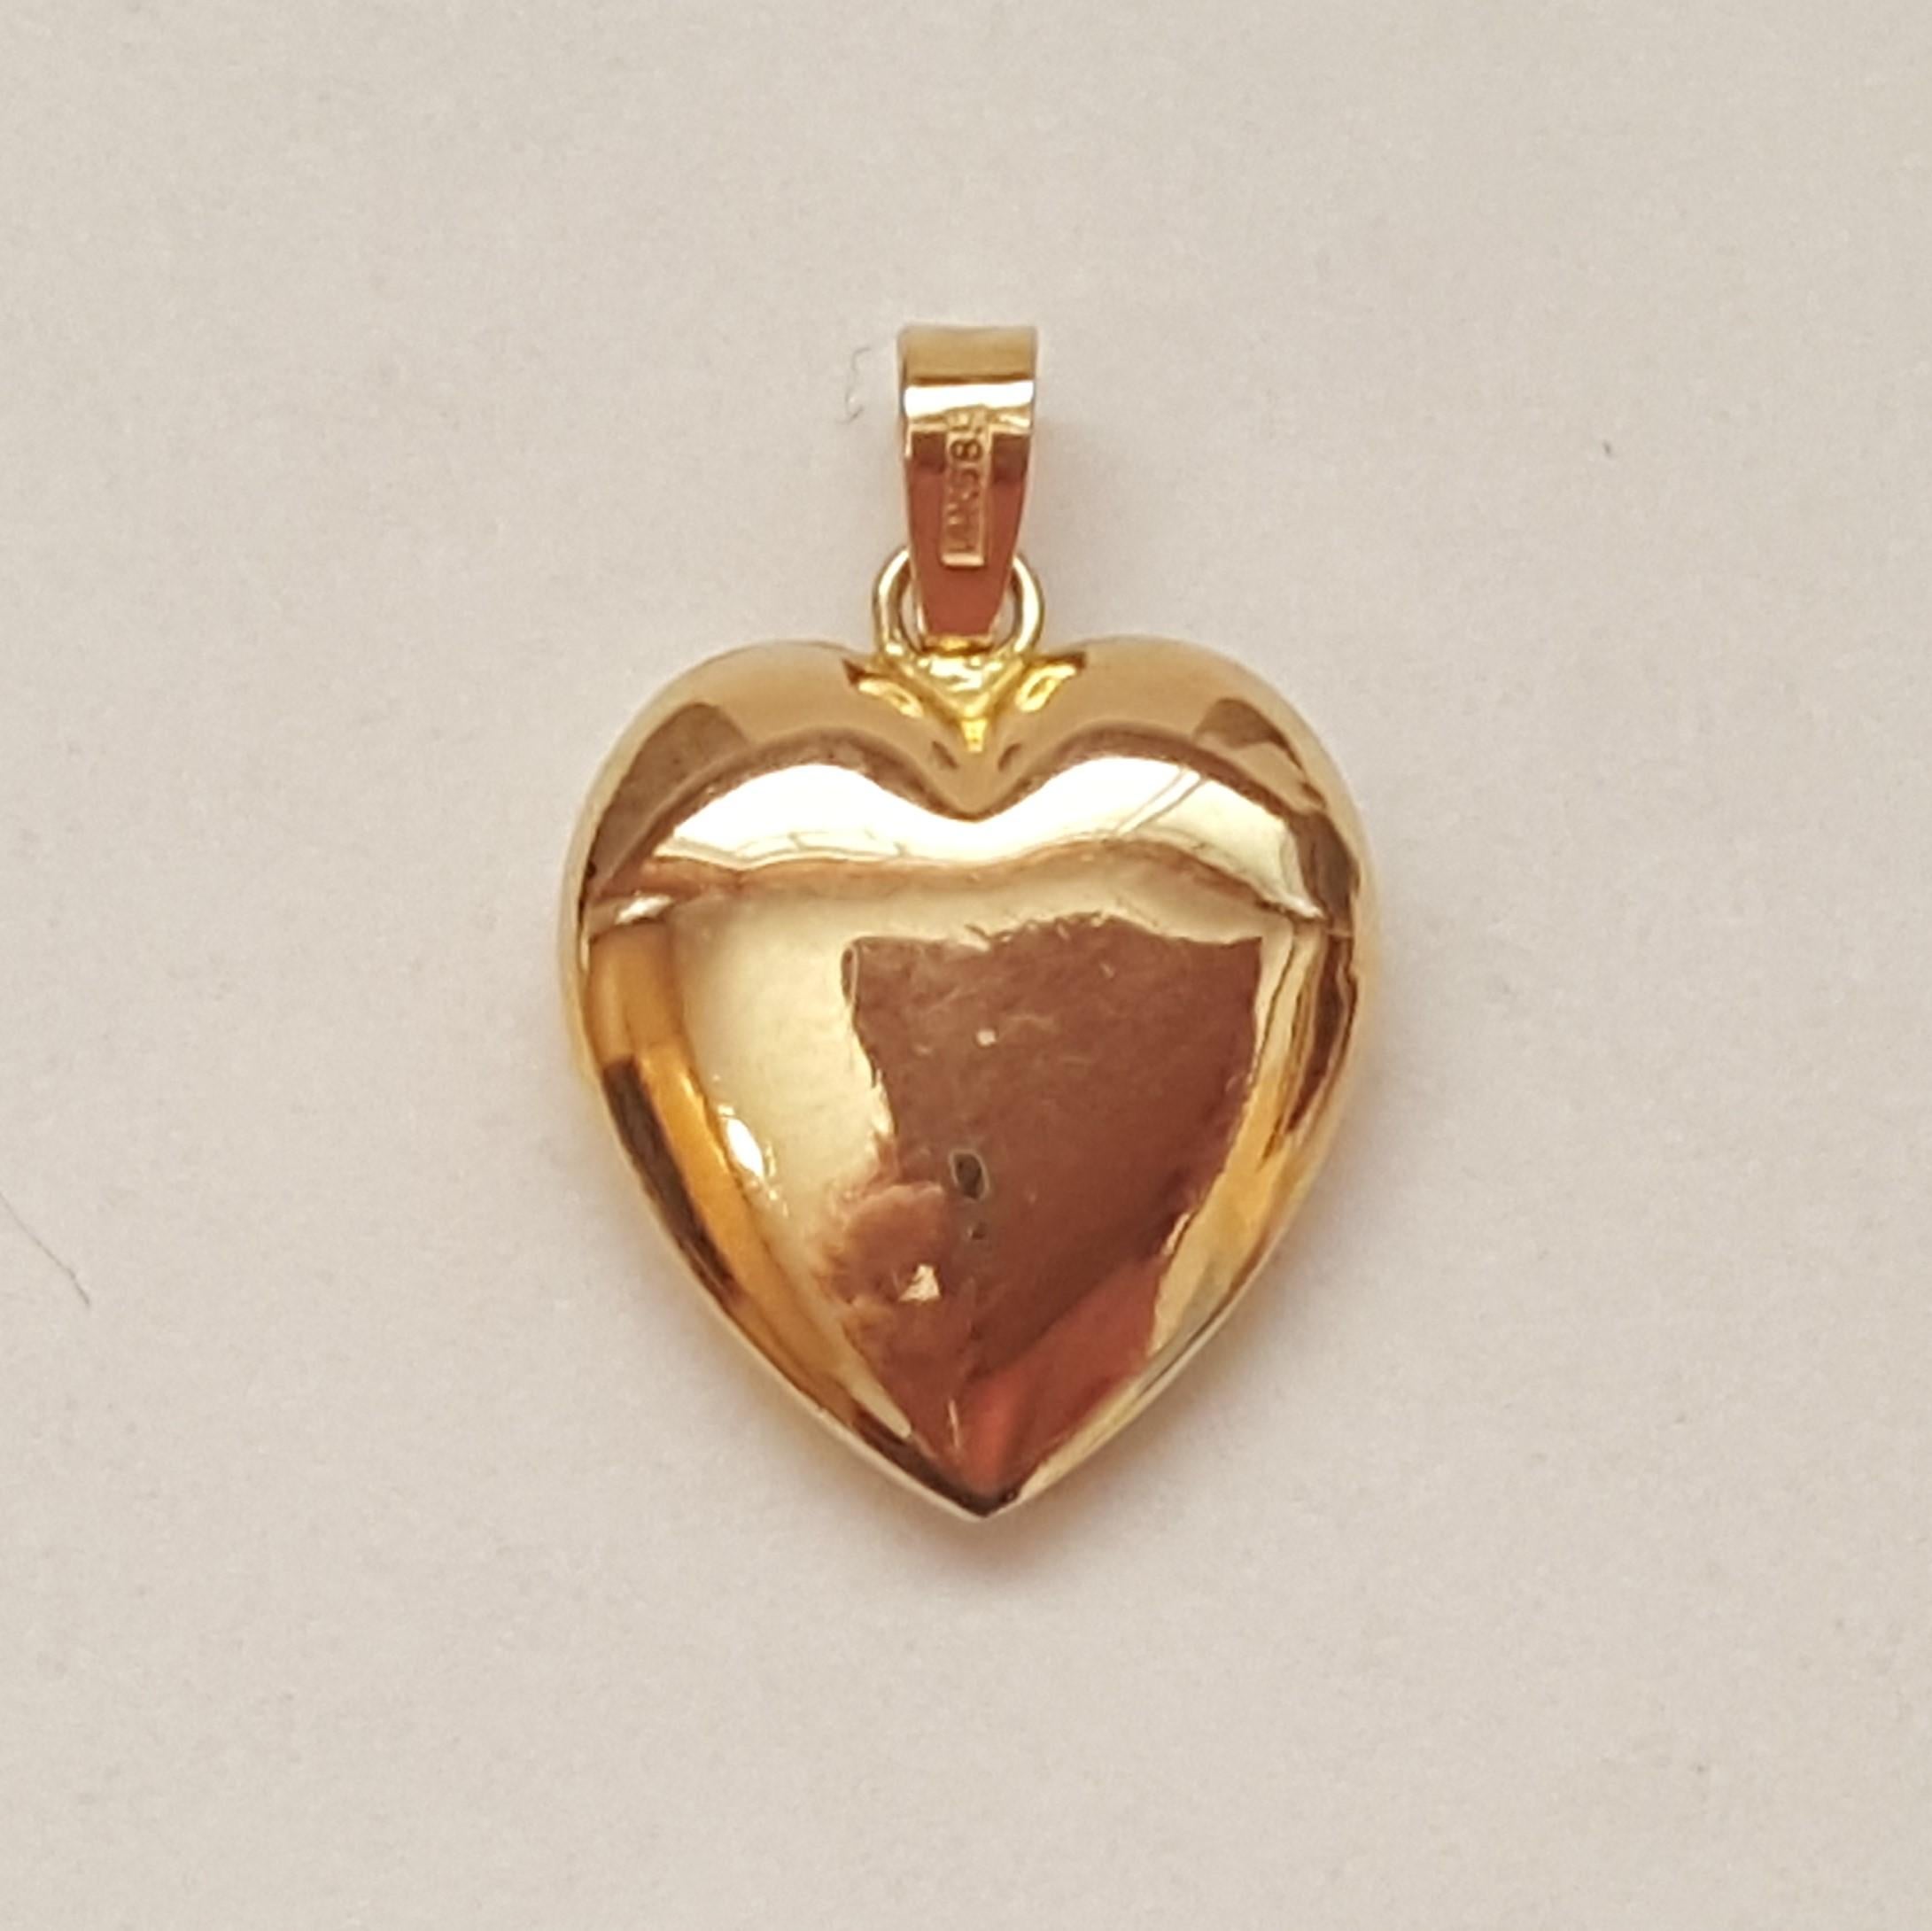 Lovely 14kt yellow gold puff heart pendant that's 15mm x 12mm x 4mm in size. The pendant is stamped 14kt 585 on the bail and is attached to a 16inch Italian box chain that's 16 inches long. The pendant and chain are approximately 3 grams in weight.